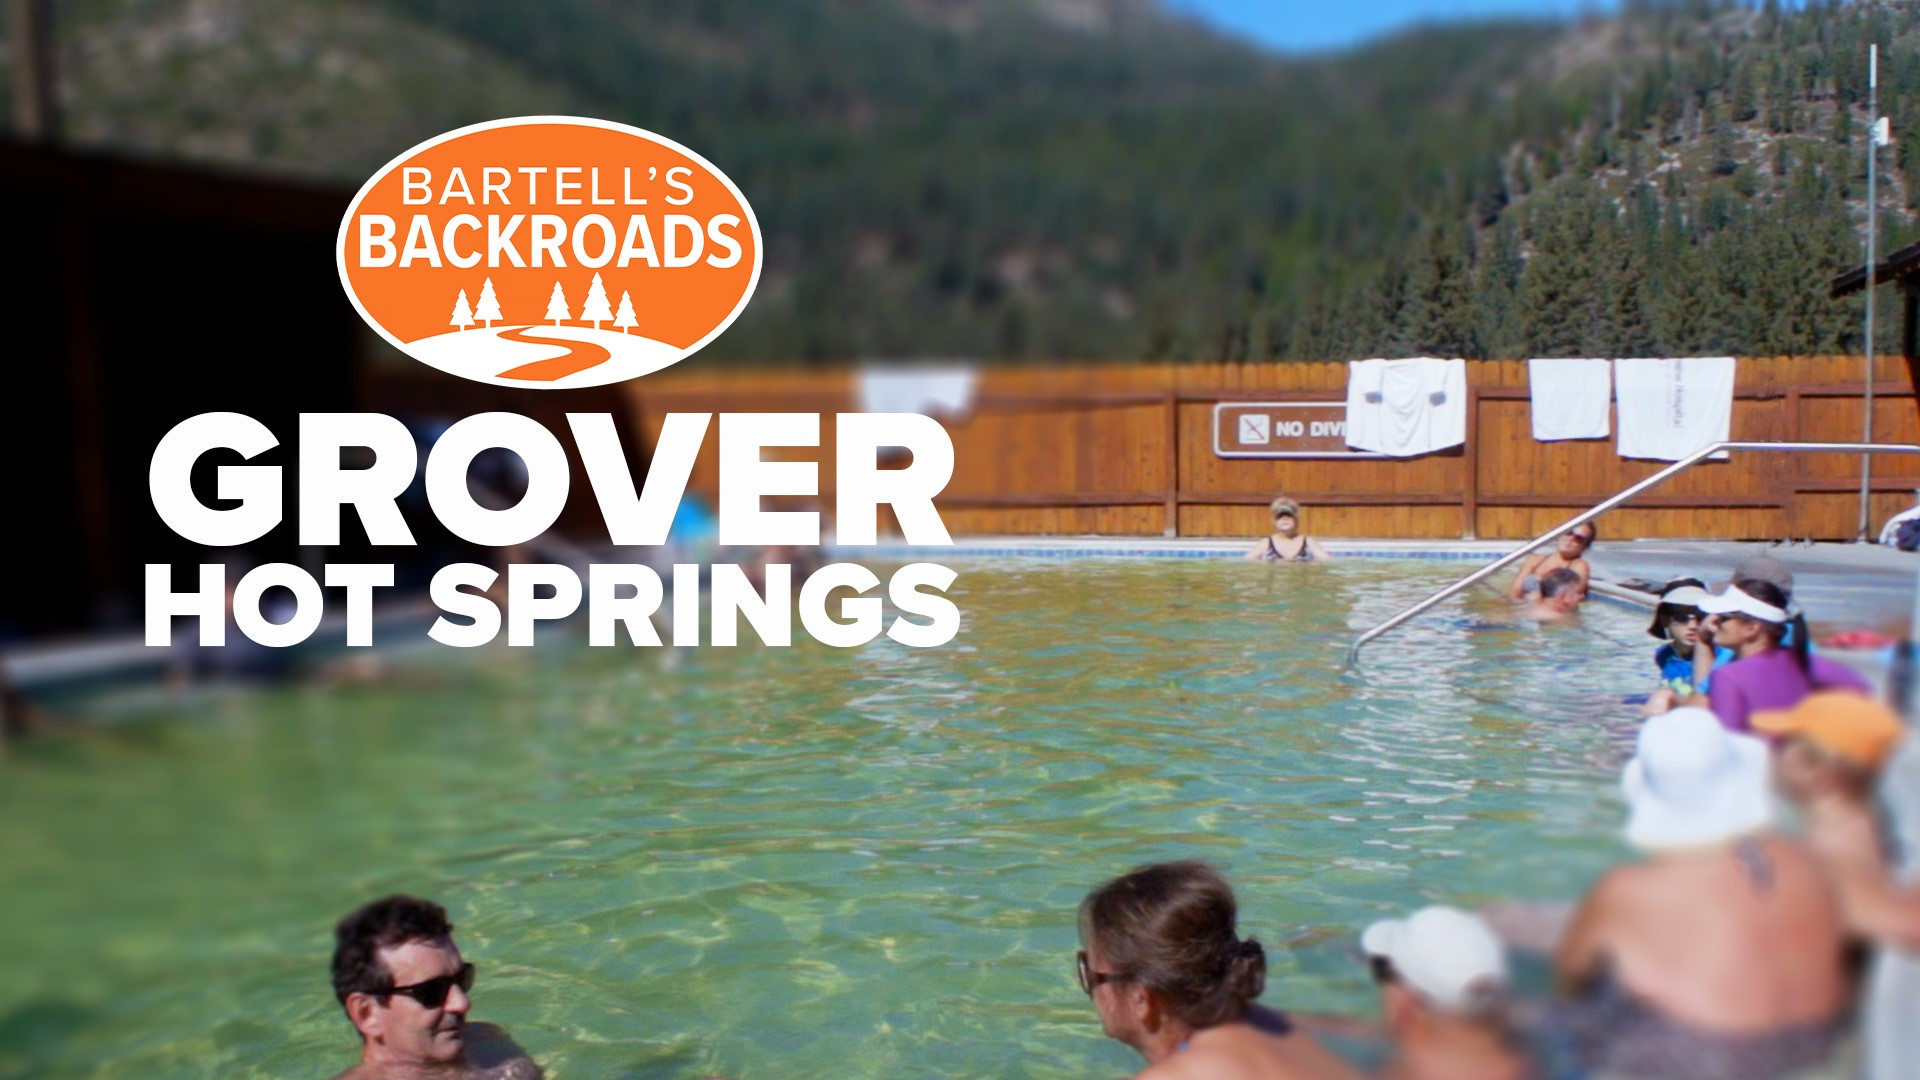 For over a century, families have headed to Grover Hot Springs in Alpine County to lounge in natural hot waters and, ironically, to chill.